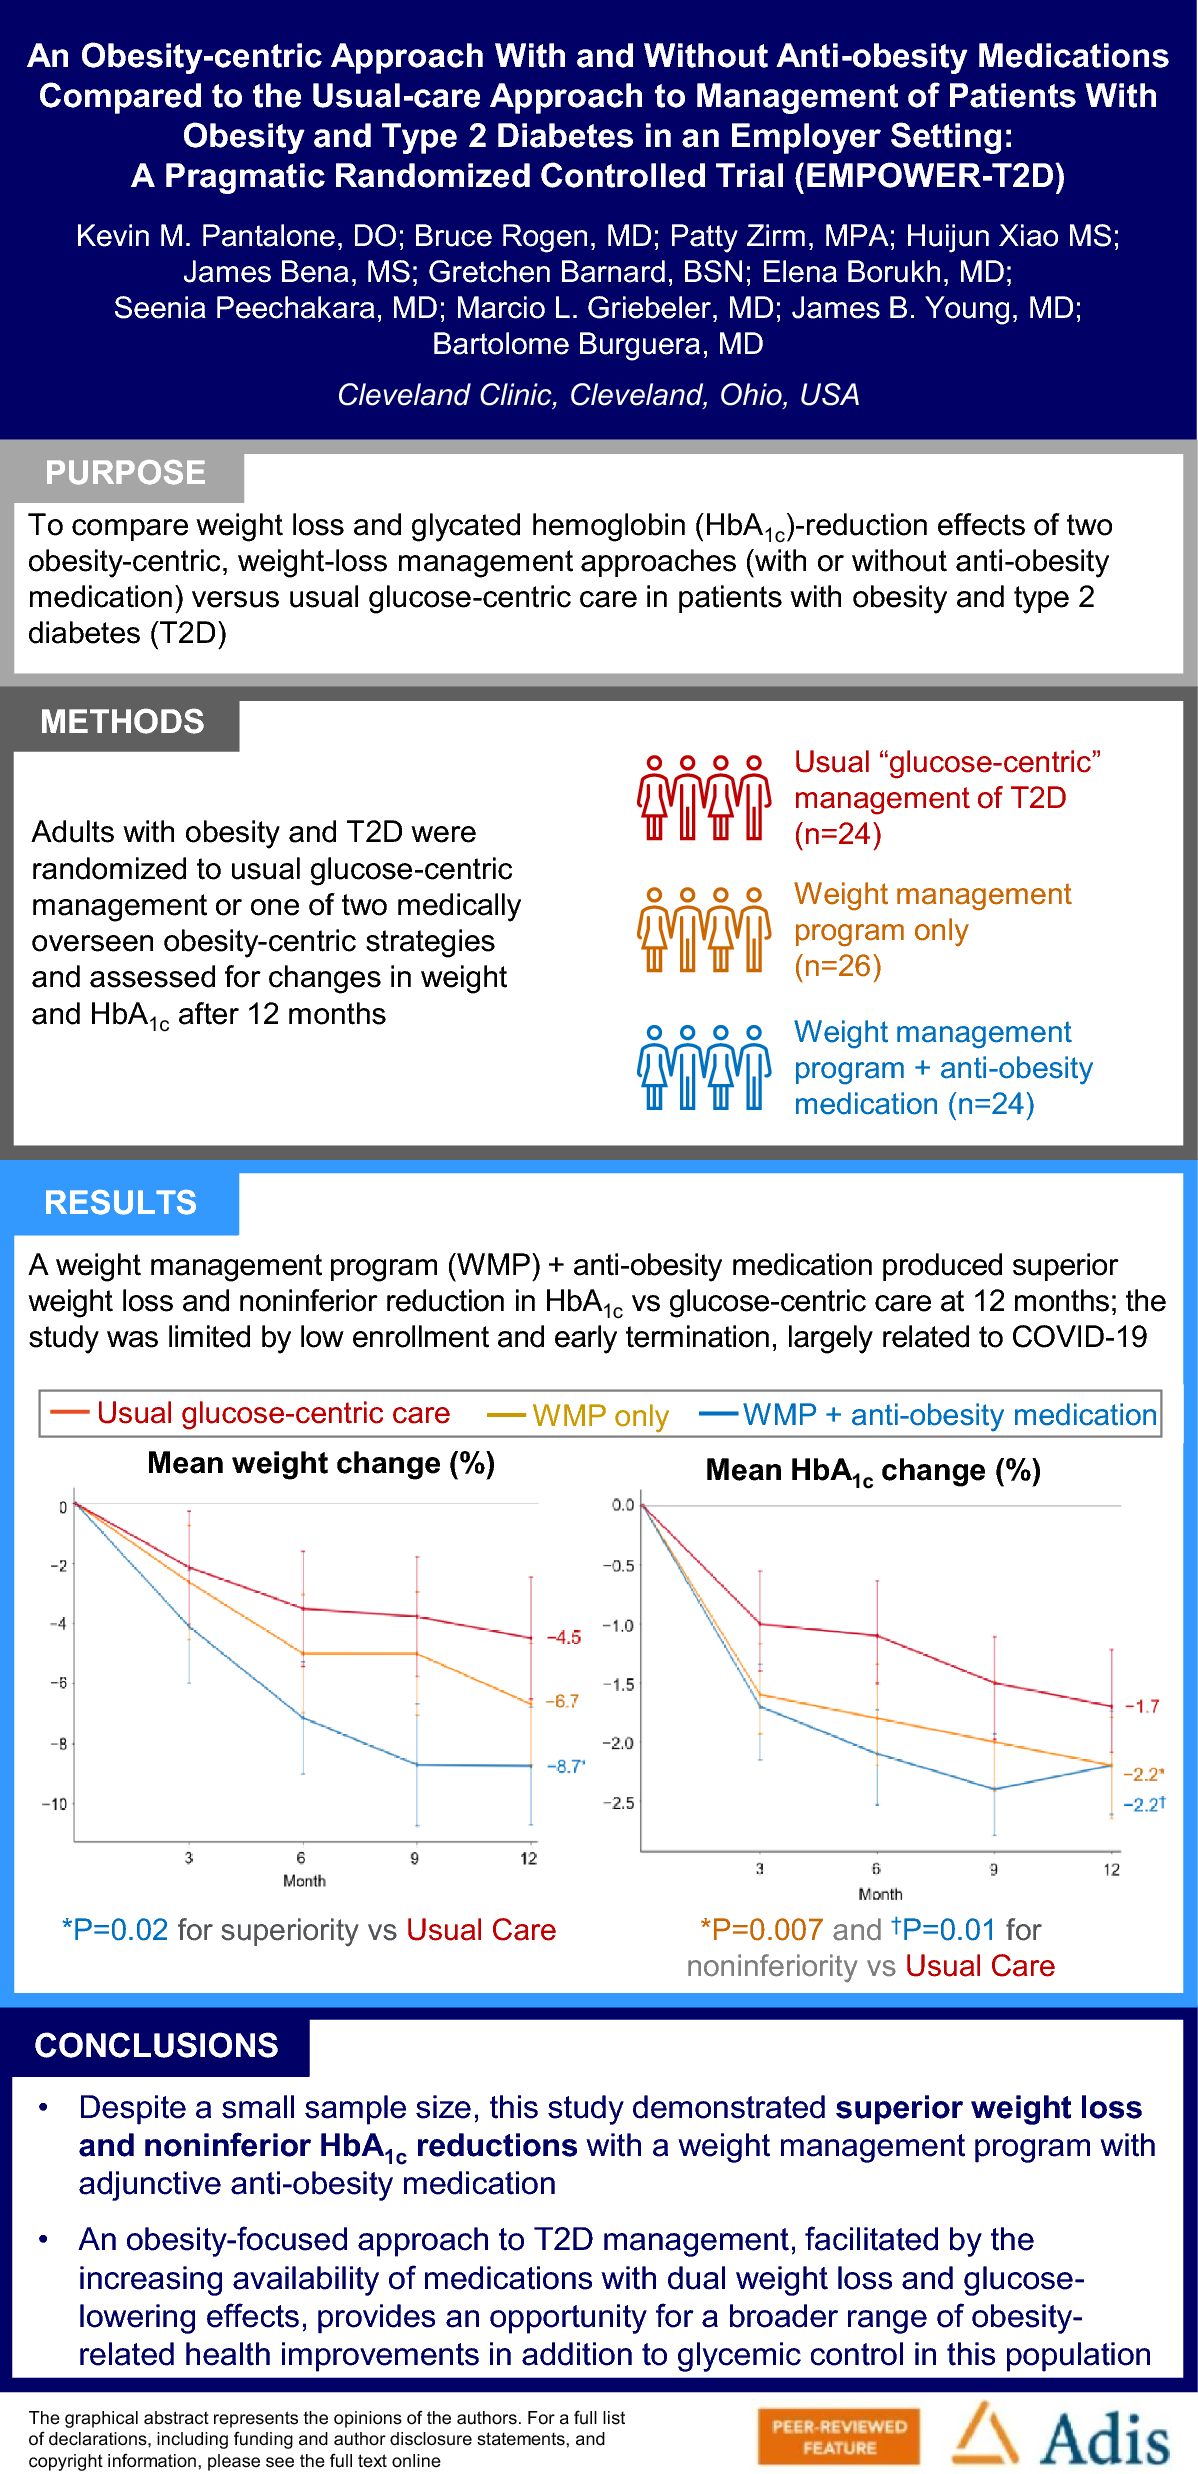 An Obesity-Centric Approach with and Without Anti-Obesity Medications Compared to the Usual-Care Approach to Management of Patients with Obesity and Type 2 Diabetes in an Employer Setting: A Pragmatic Randomized Controlled Trial (EMPOWER-T2D)